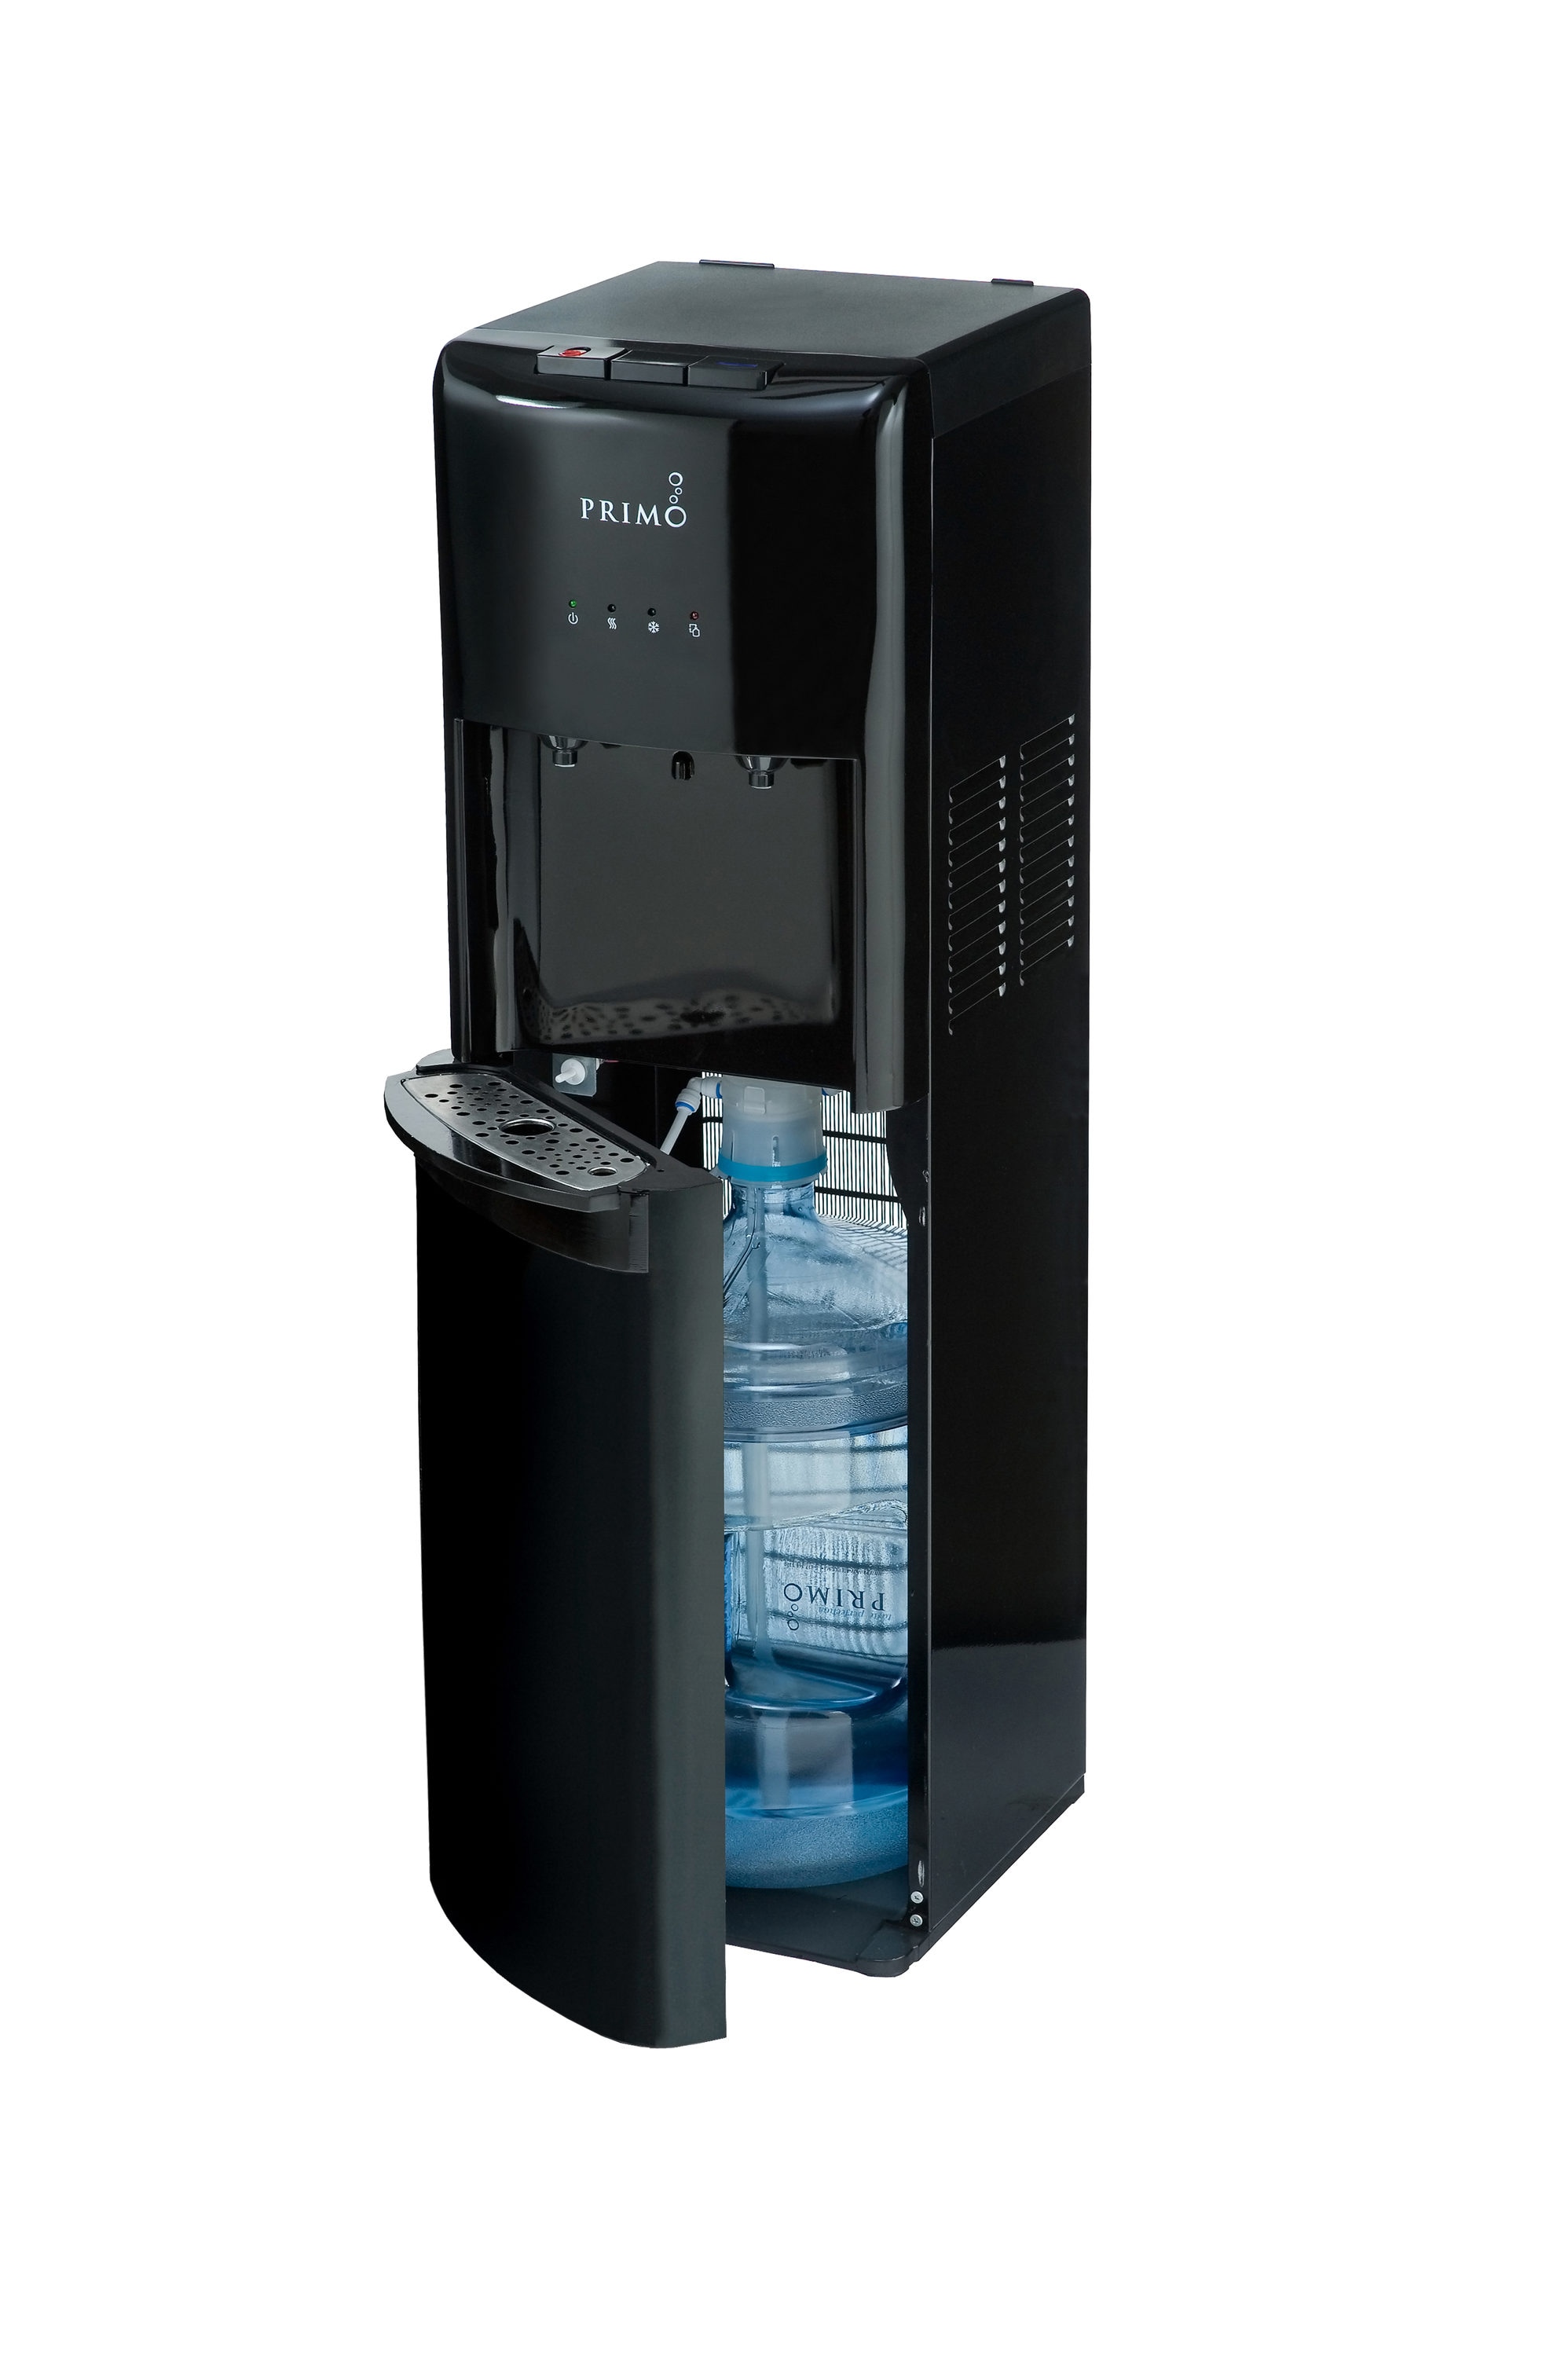 Mist Top Loading Water Cooler with Child Safety Lock, 3 Temperature Options, Holds 3 and 5 Gallon Bottles- Black